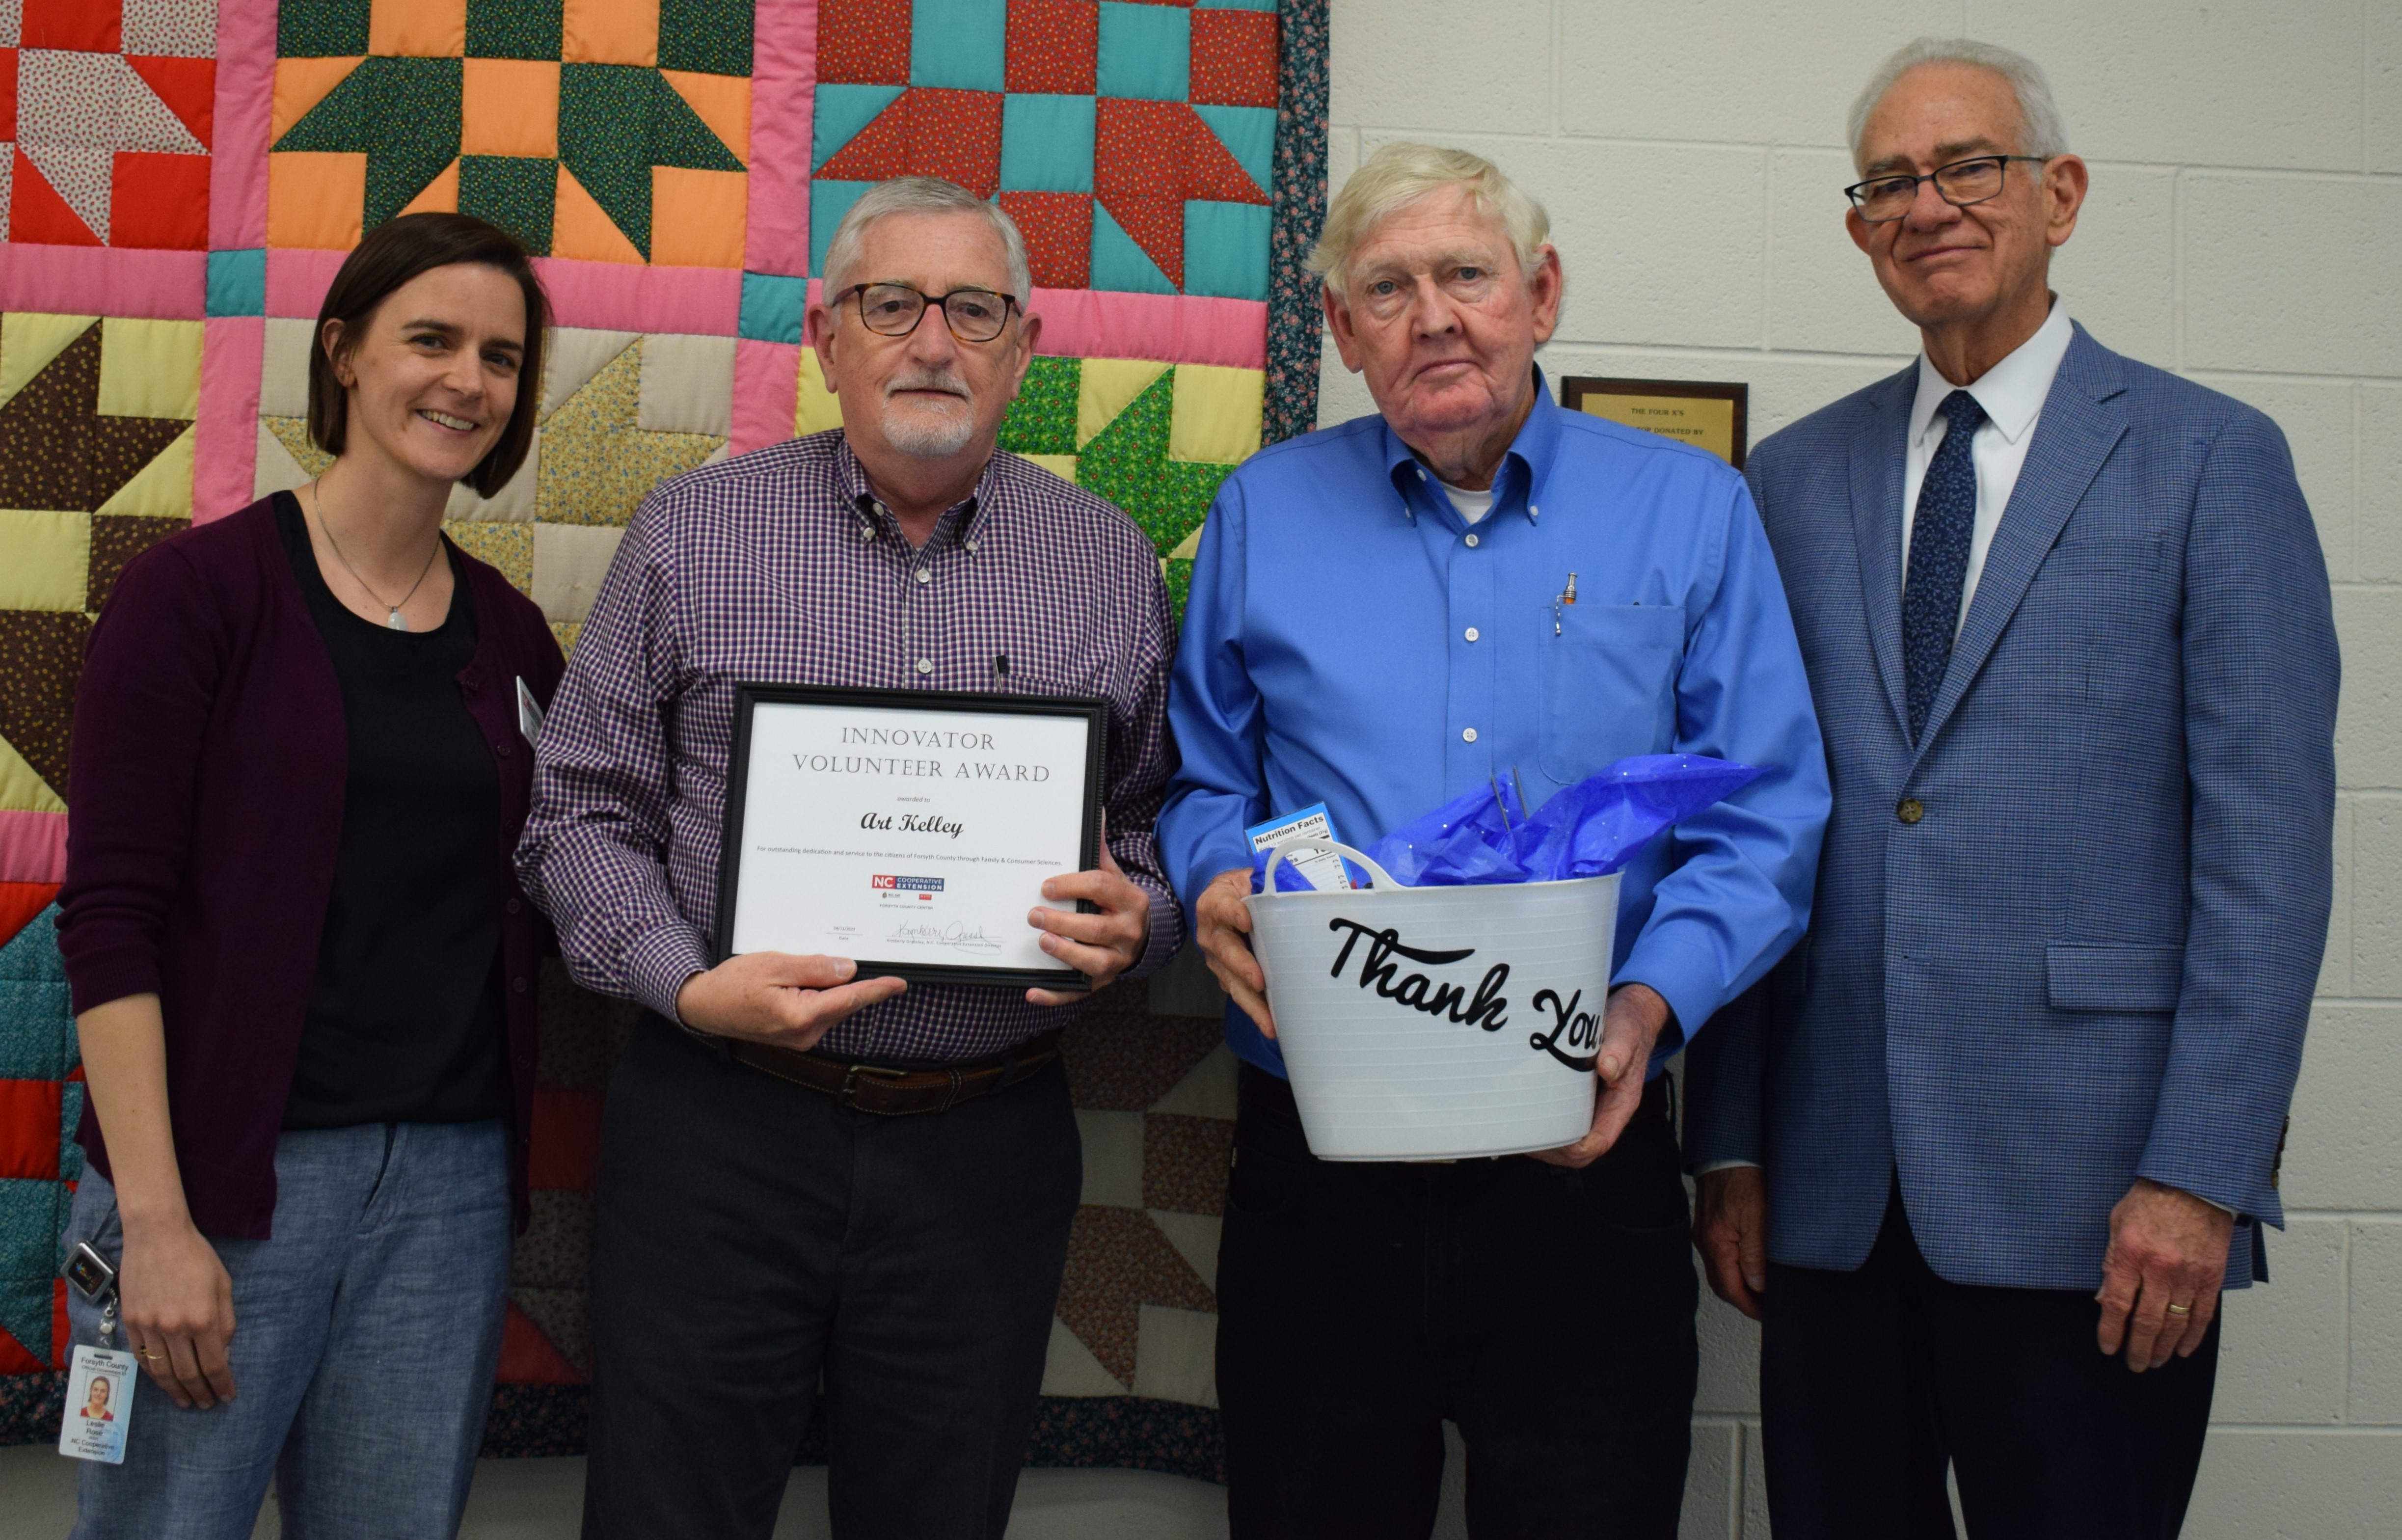 Innovator Award Recipient, Art Kelley with Horticulture Agent, Leslie Rose, and Forsyth County Commissioners Richard Linville and Dr. Don Martin